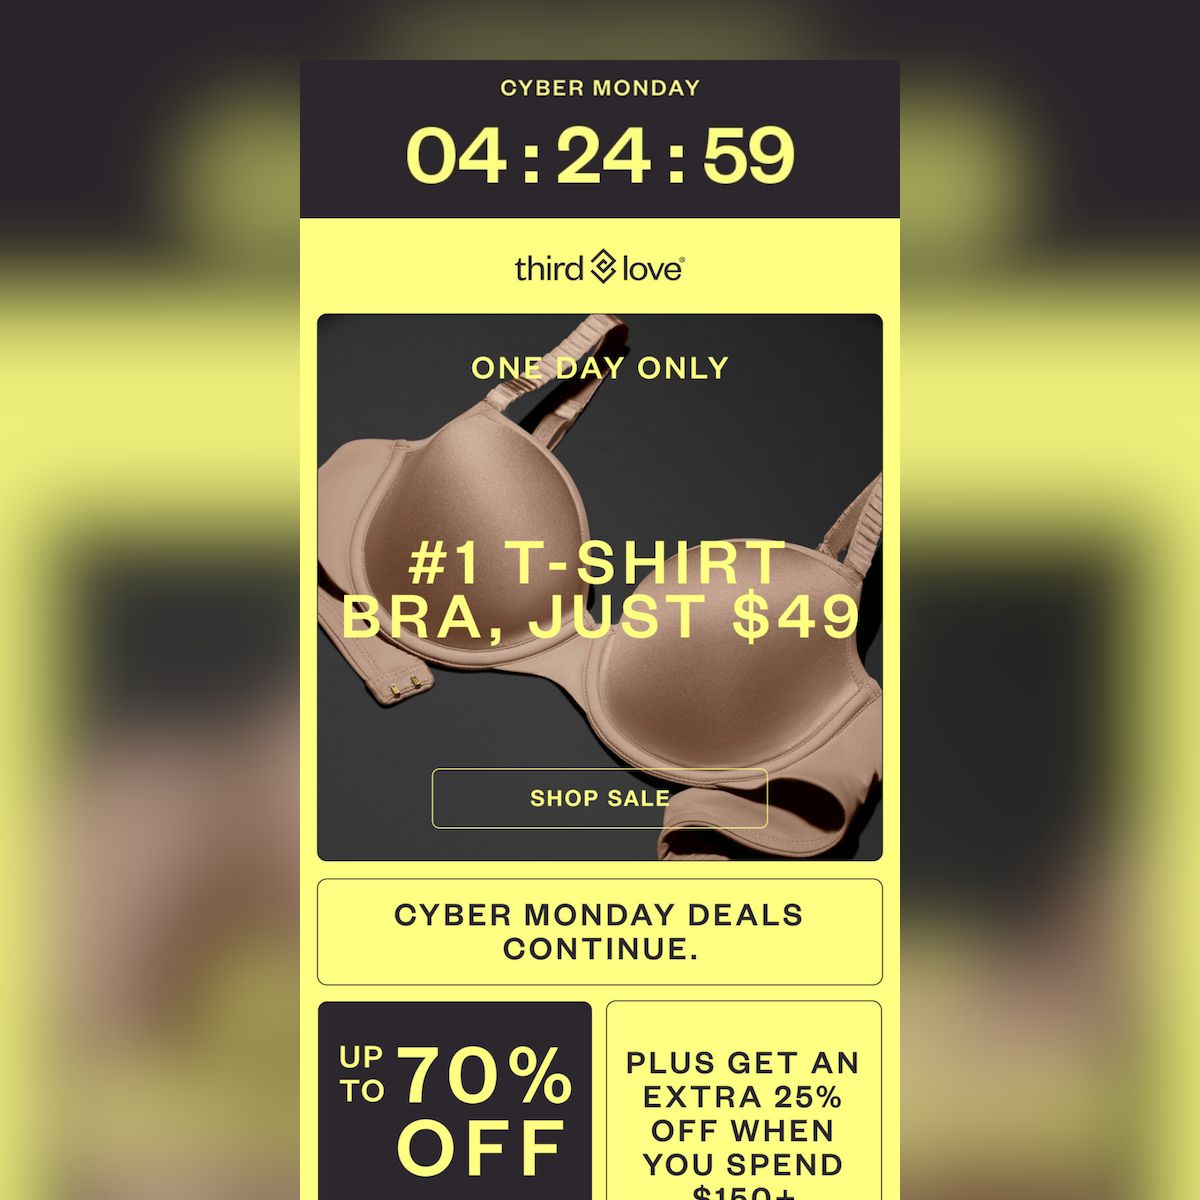 ThirdLove is bringing the heat this Cyber Monday with a huge countdown timer! Loving the design and the sense of urgency it brings. #CyberMonday #Deals

View the full email → buff.ly/3SXJMtv